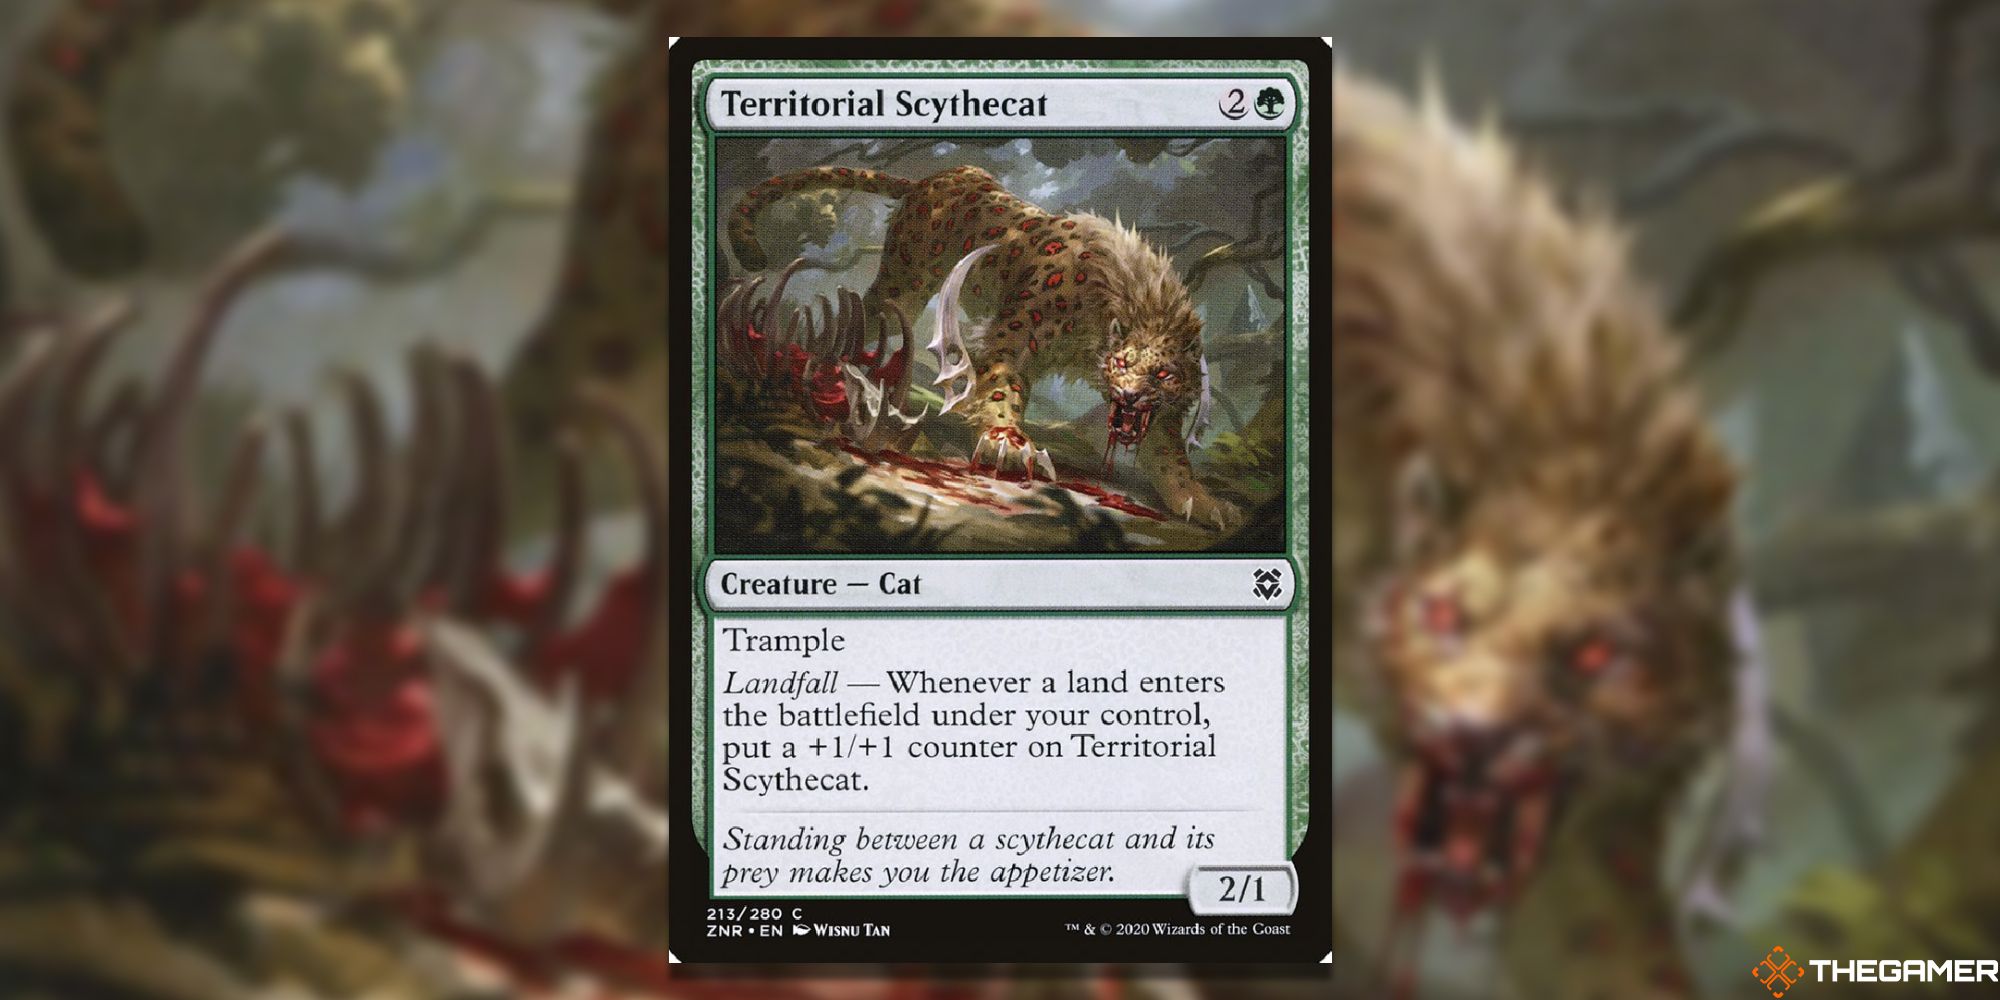 Magic: The Gathering Territorial Scythecat full card with background